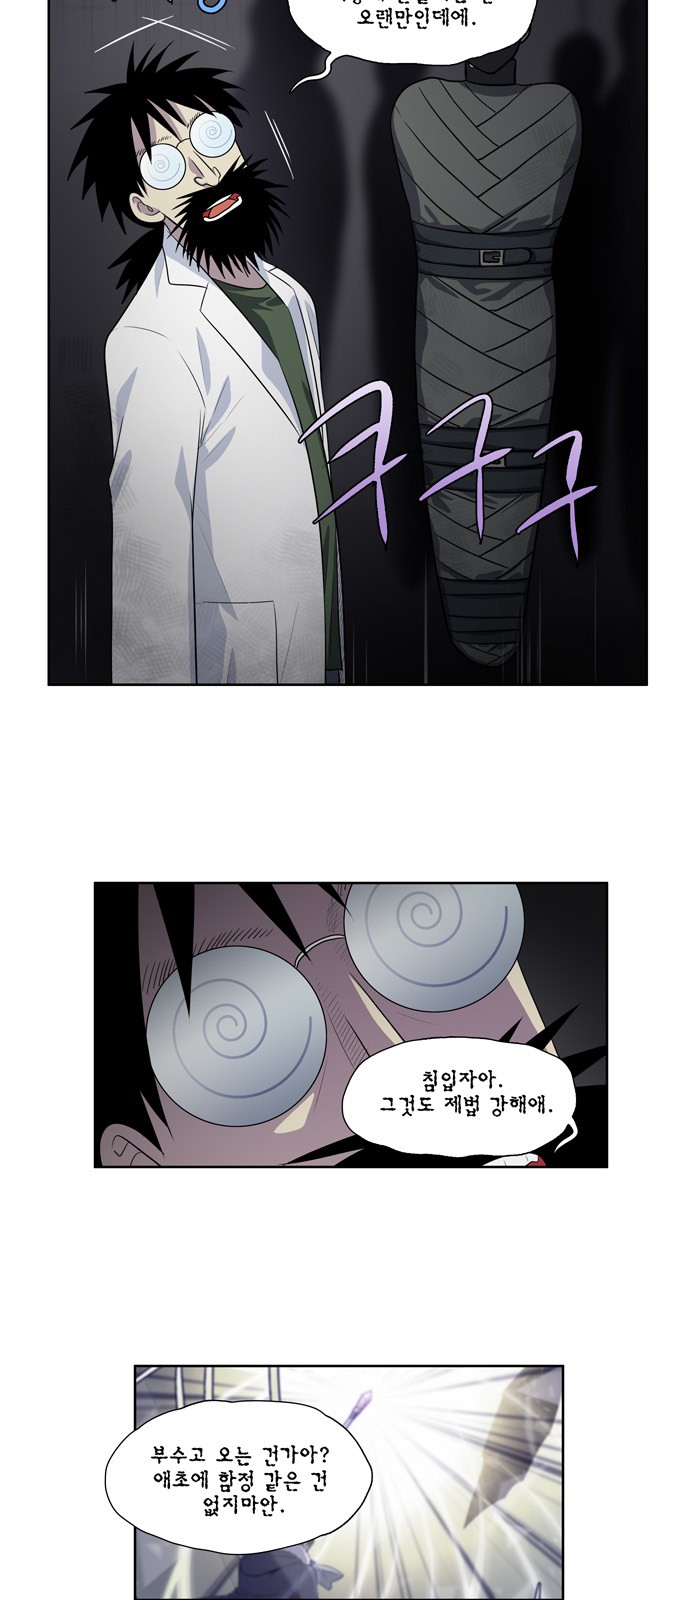 The Gamer - Chapter 163 - Page 2